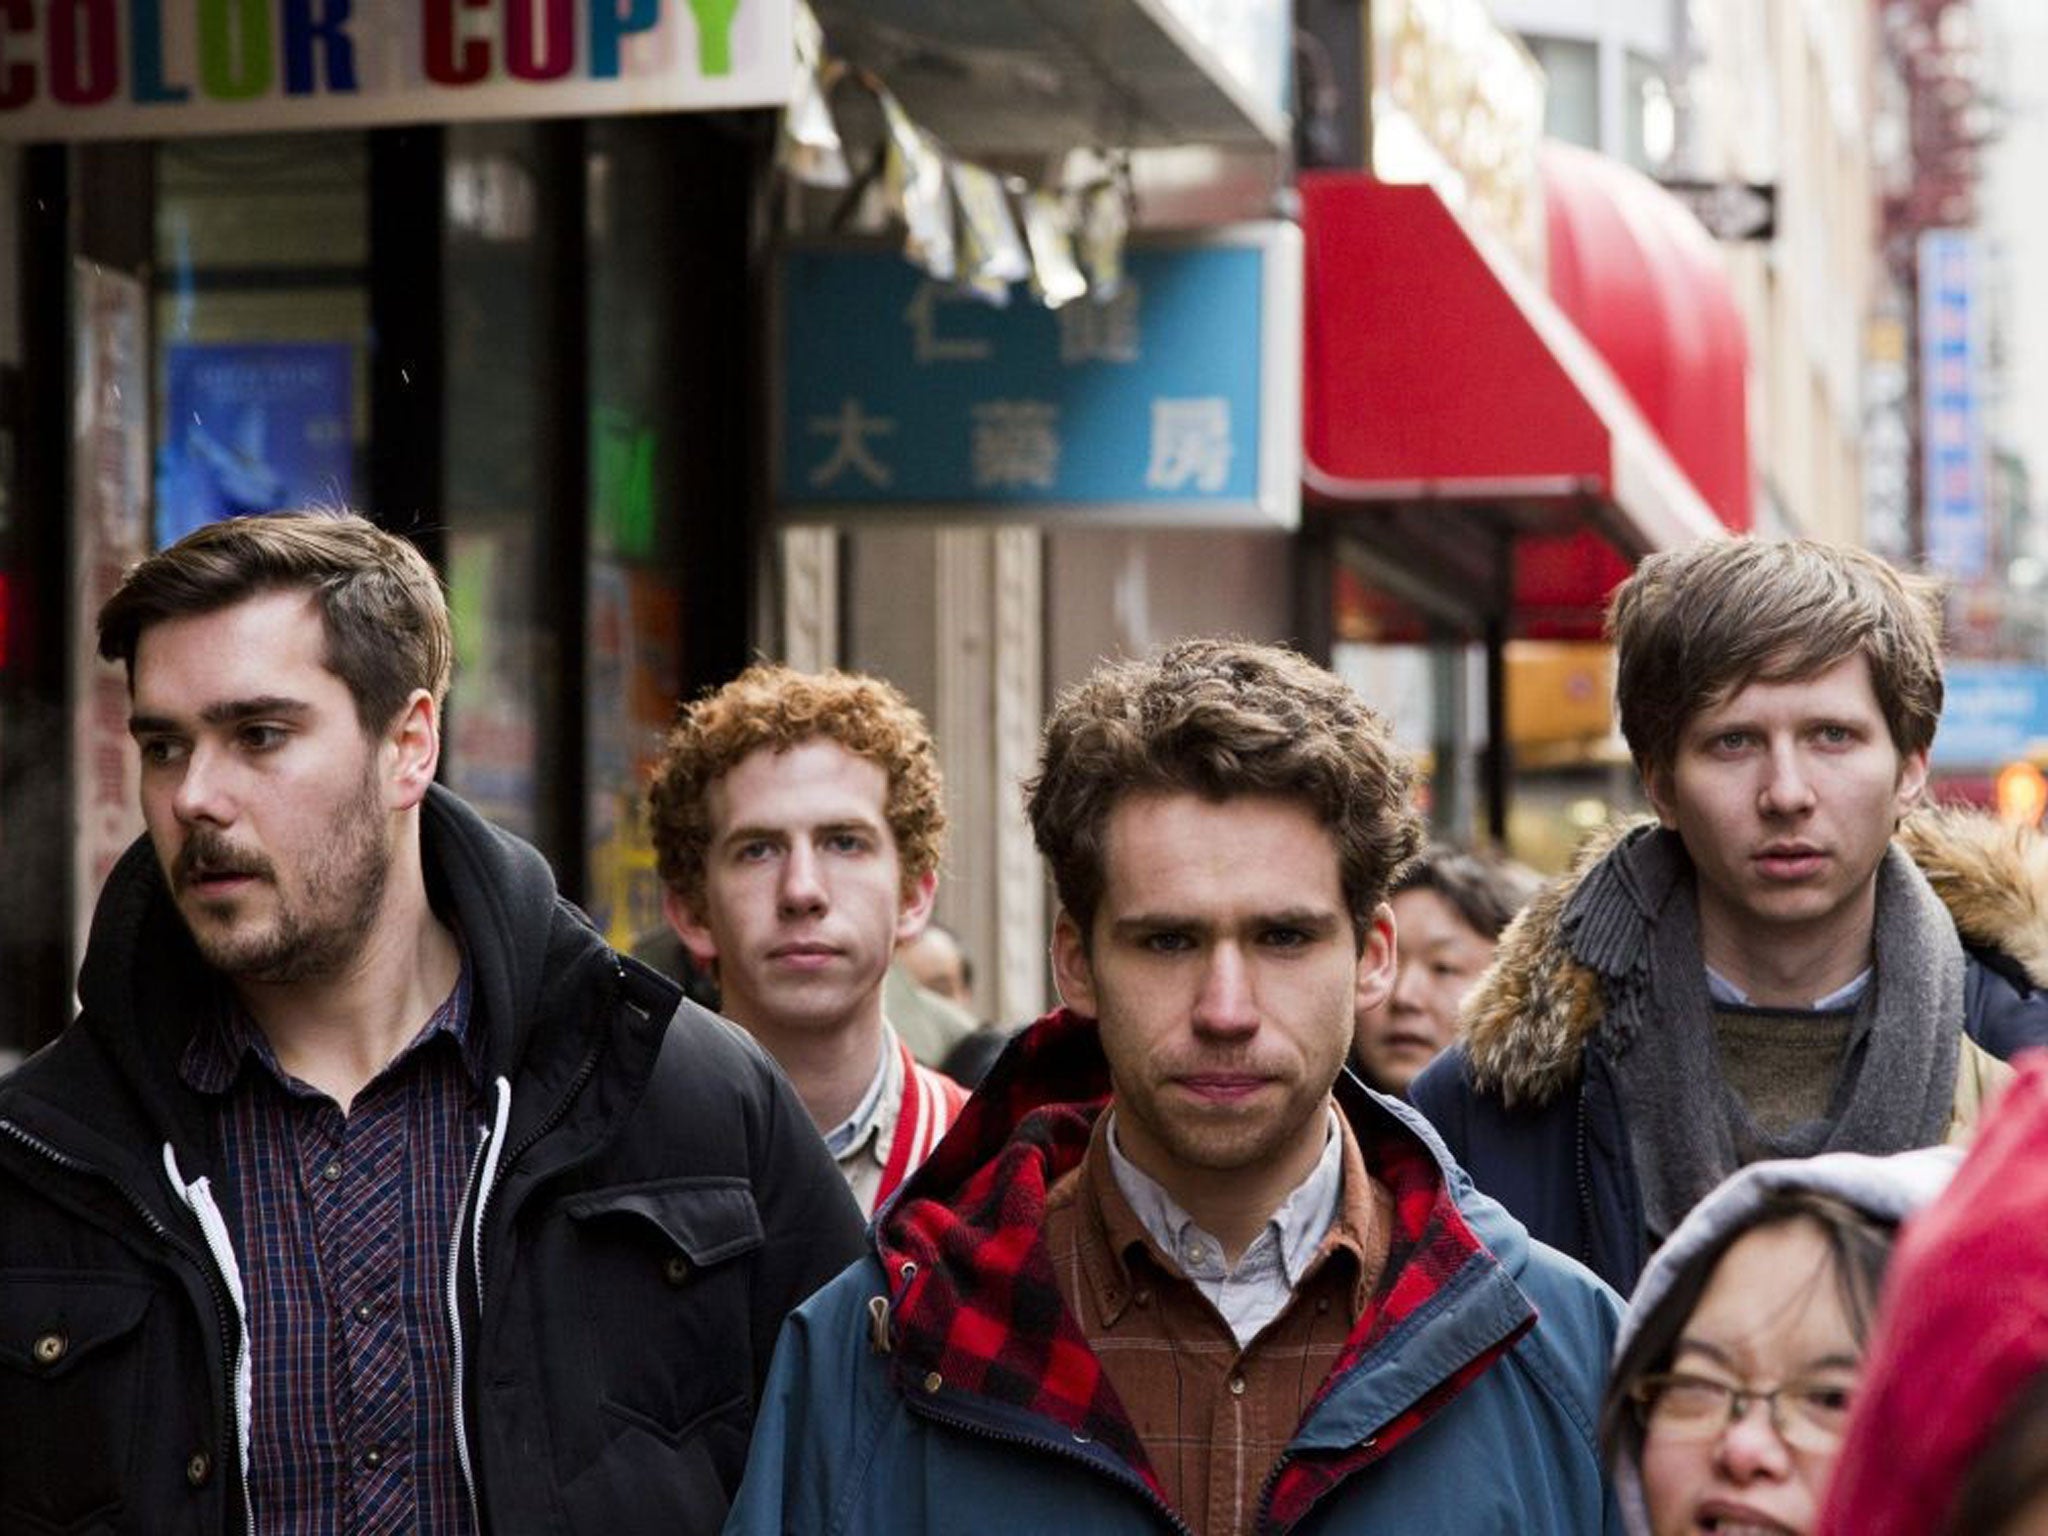 Brooklyn post-punk band Parquet Courts have recorded a new five track EP